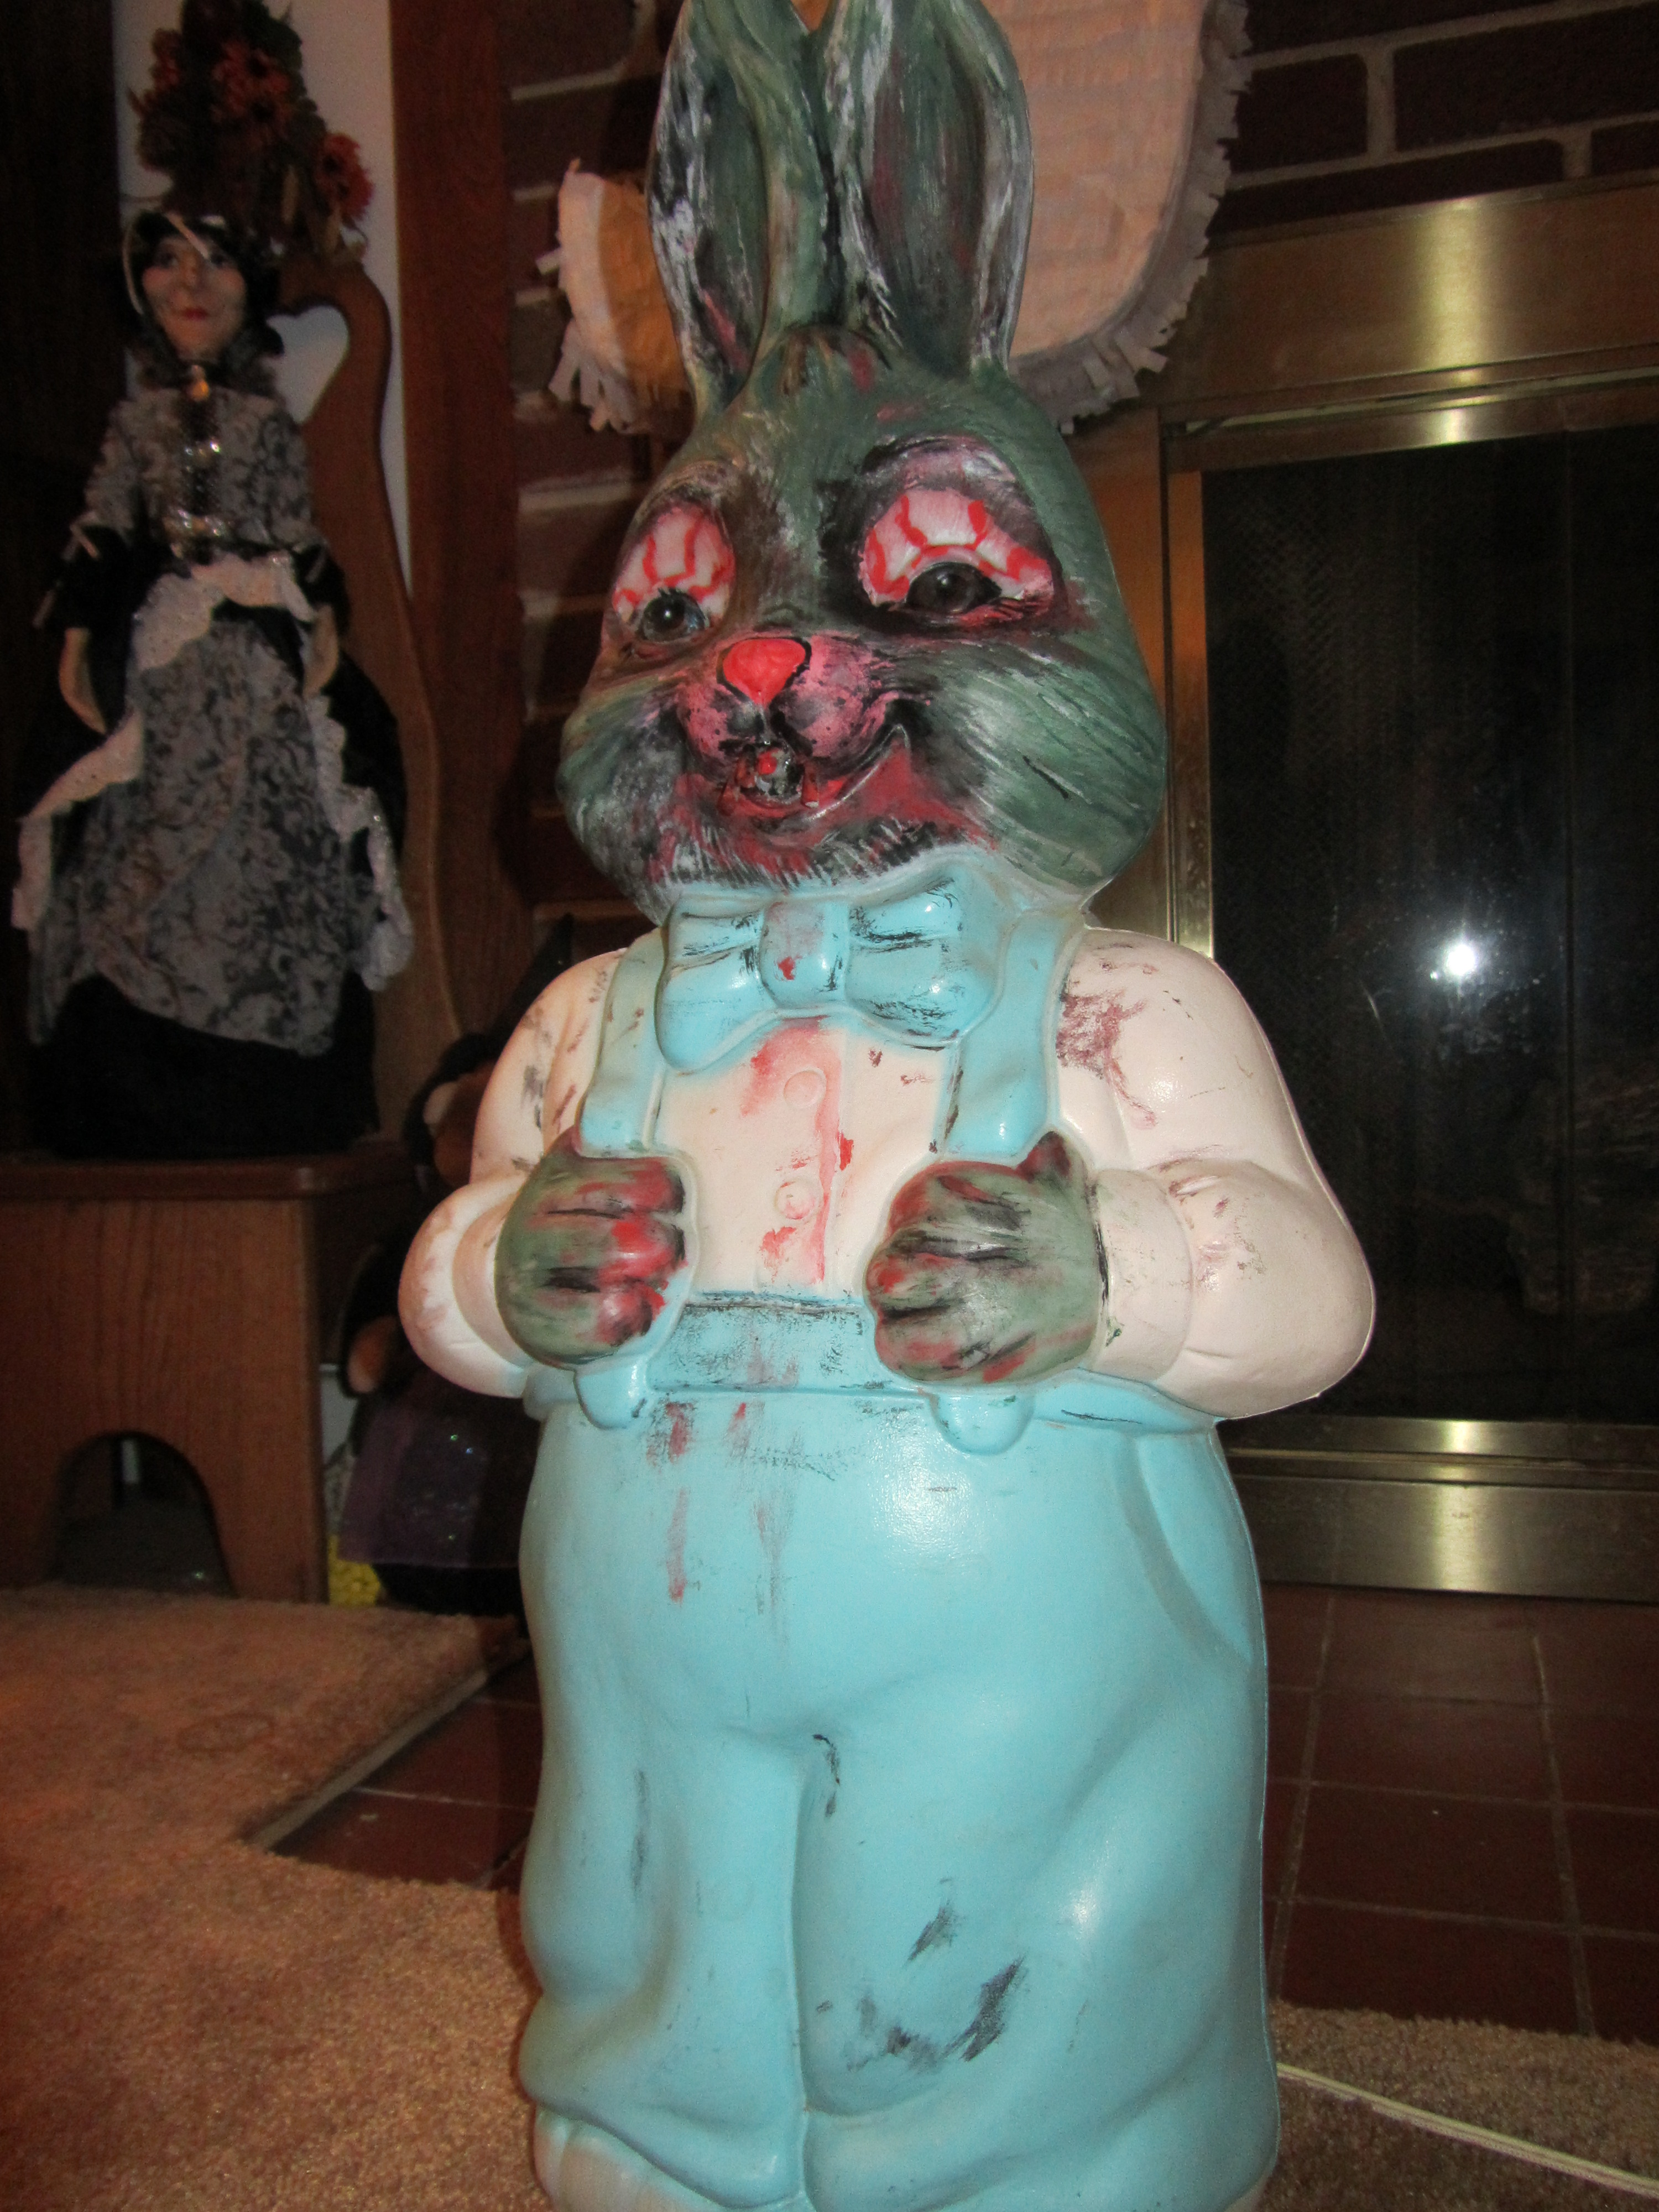 DIY: Transforming the Easter Bunny into a Zombie